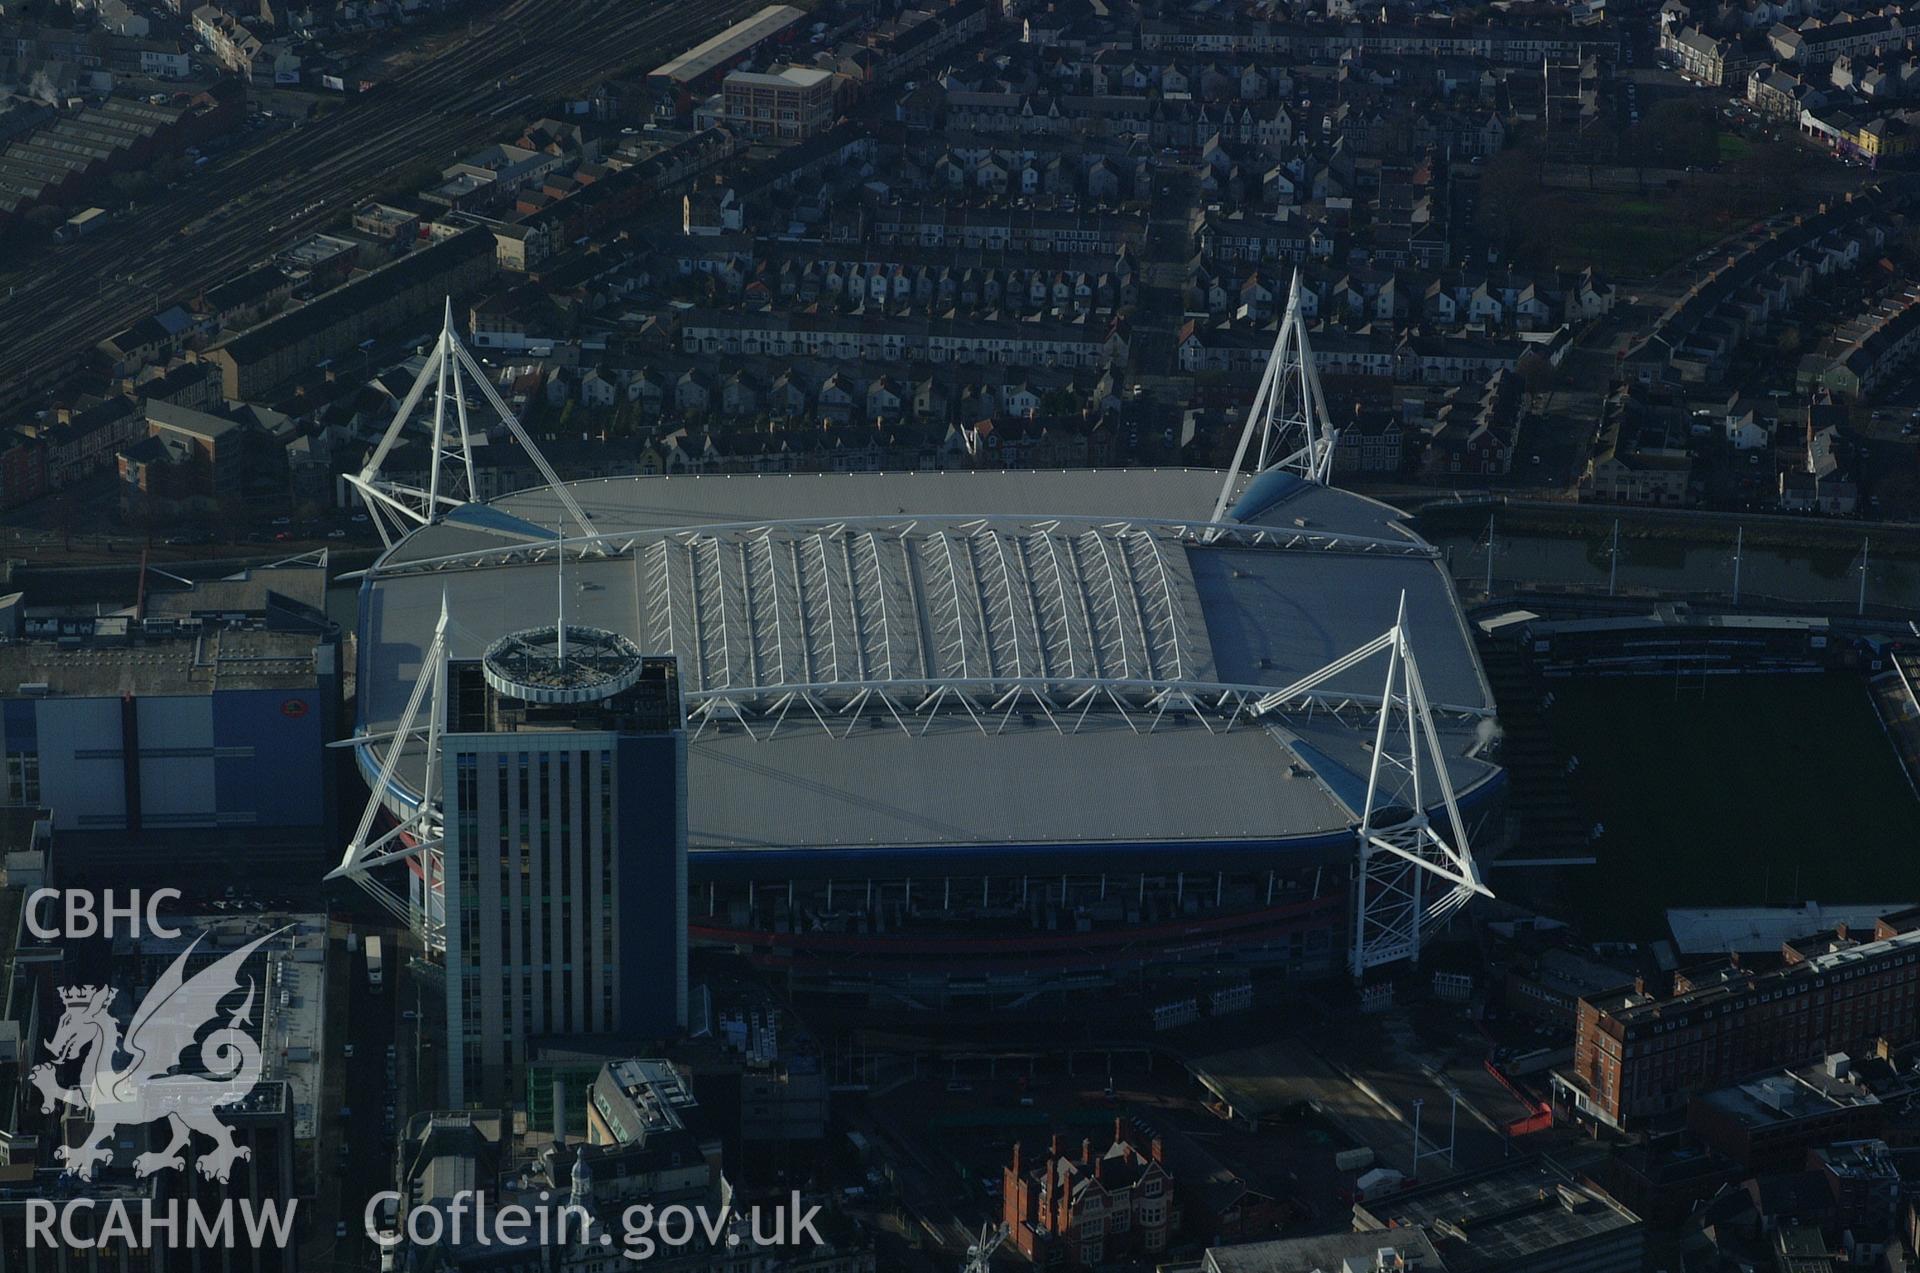 RCAHMW colour oblique aerial photograph of Cardiff Millennium Stadium taken on 13/01/2005 by Toby Driver